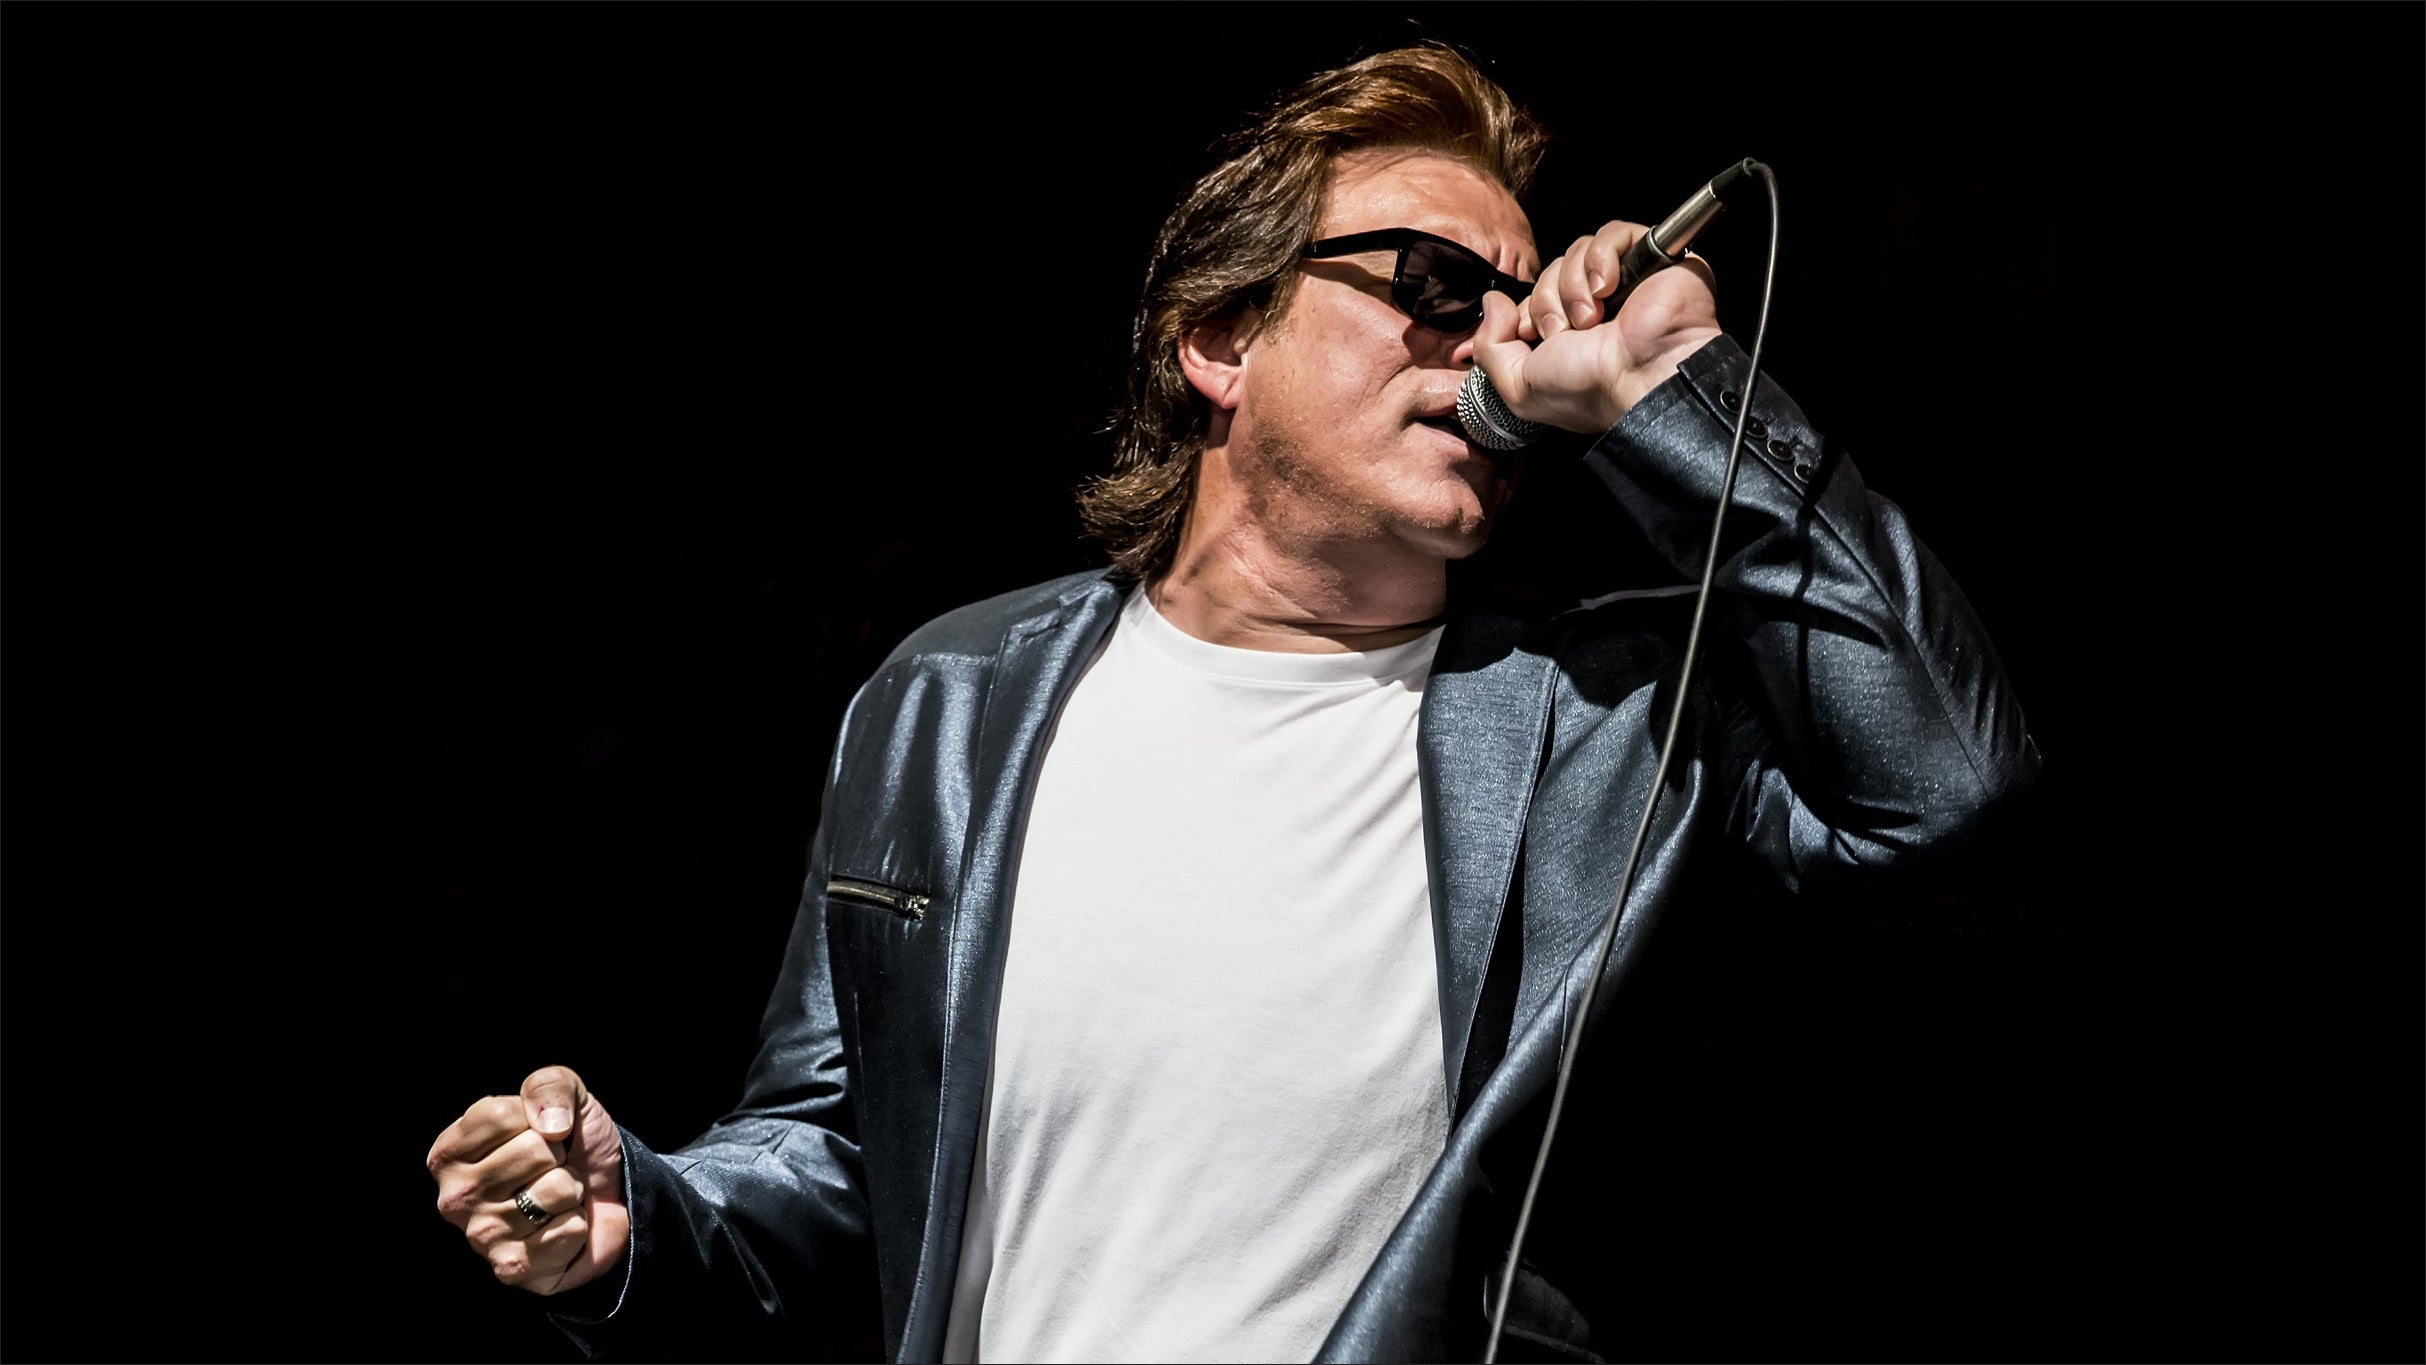 The Heart Of Rock & Roll - A Tribute To Huey Lewis & The News in Huntington promo photo for Live Nation presale offer code